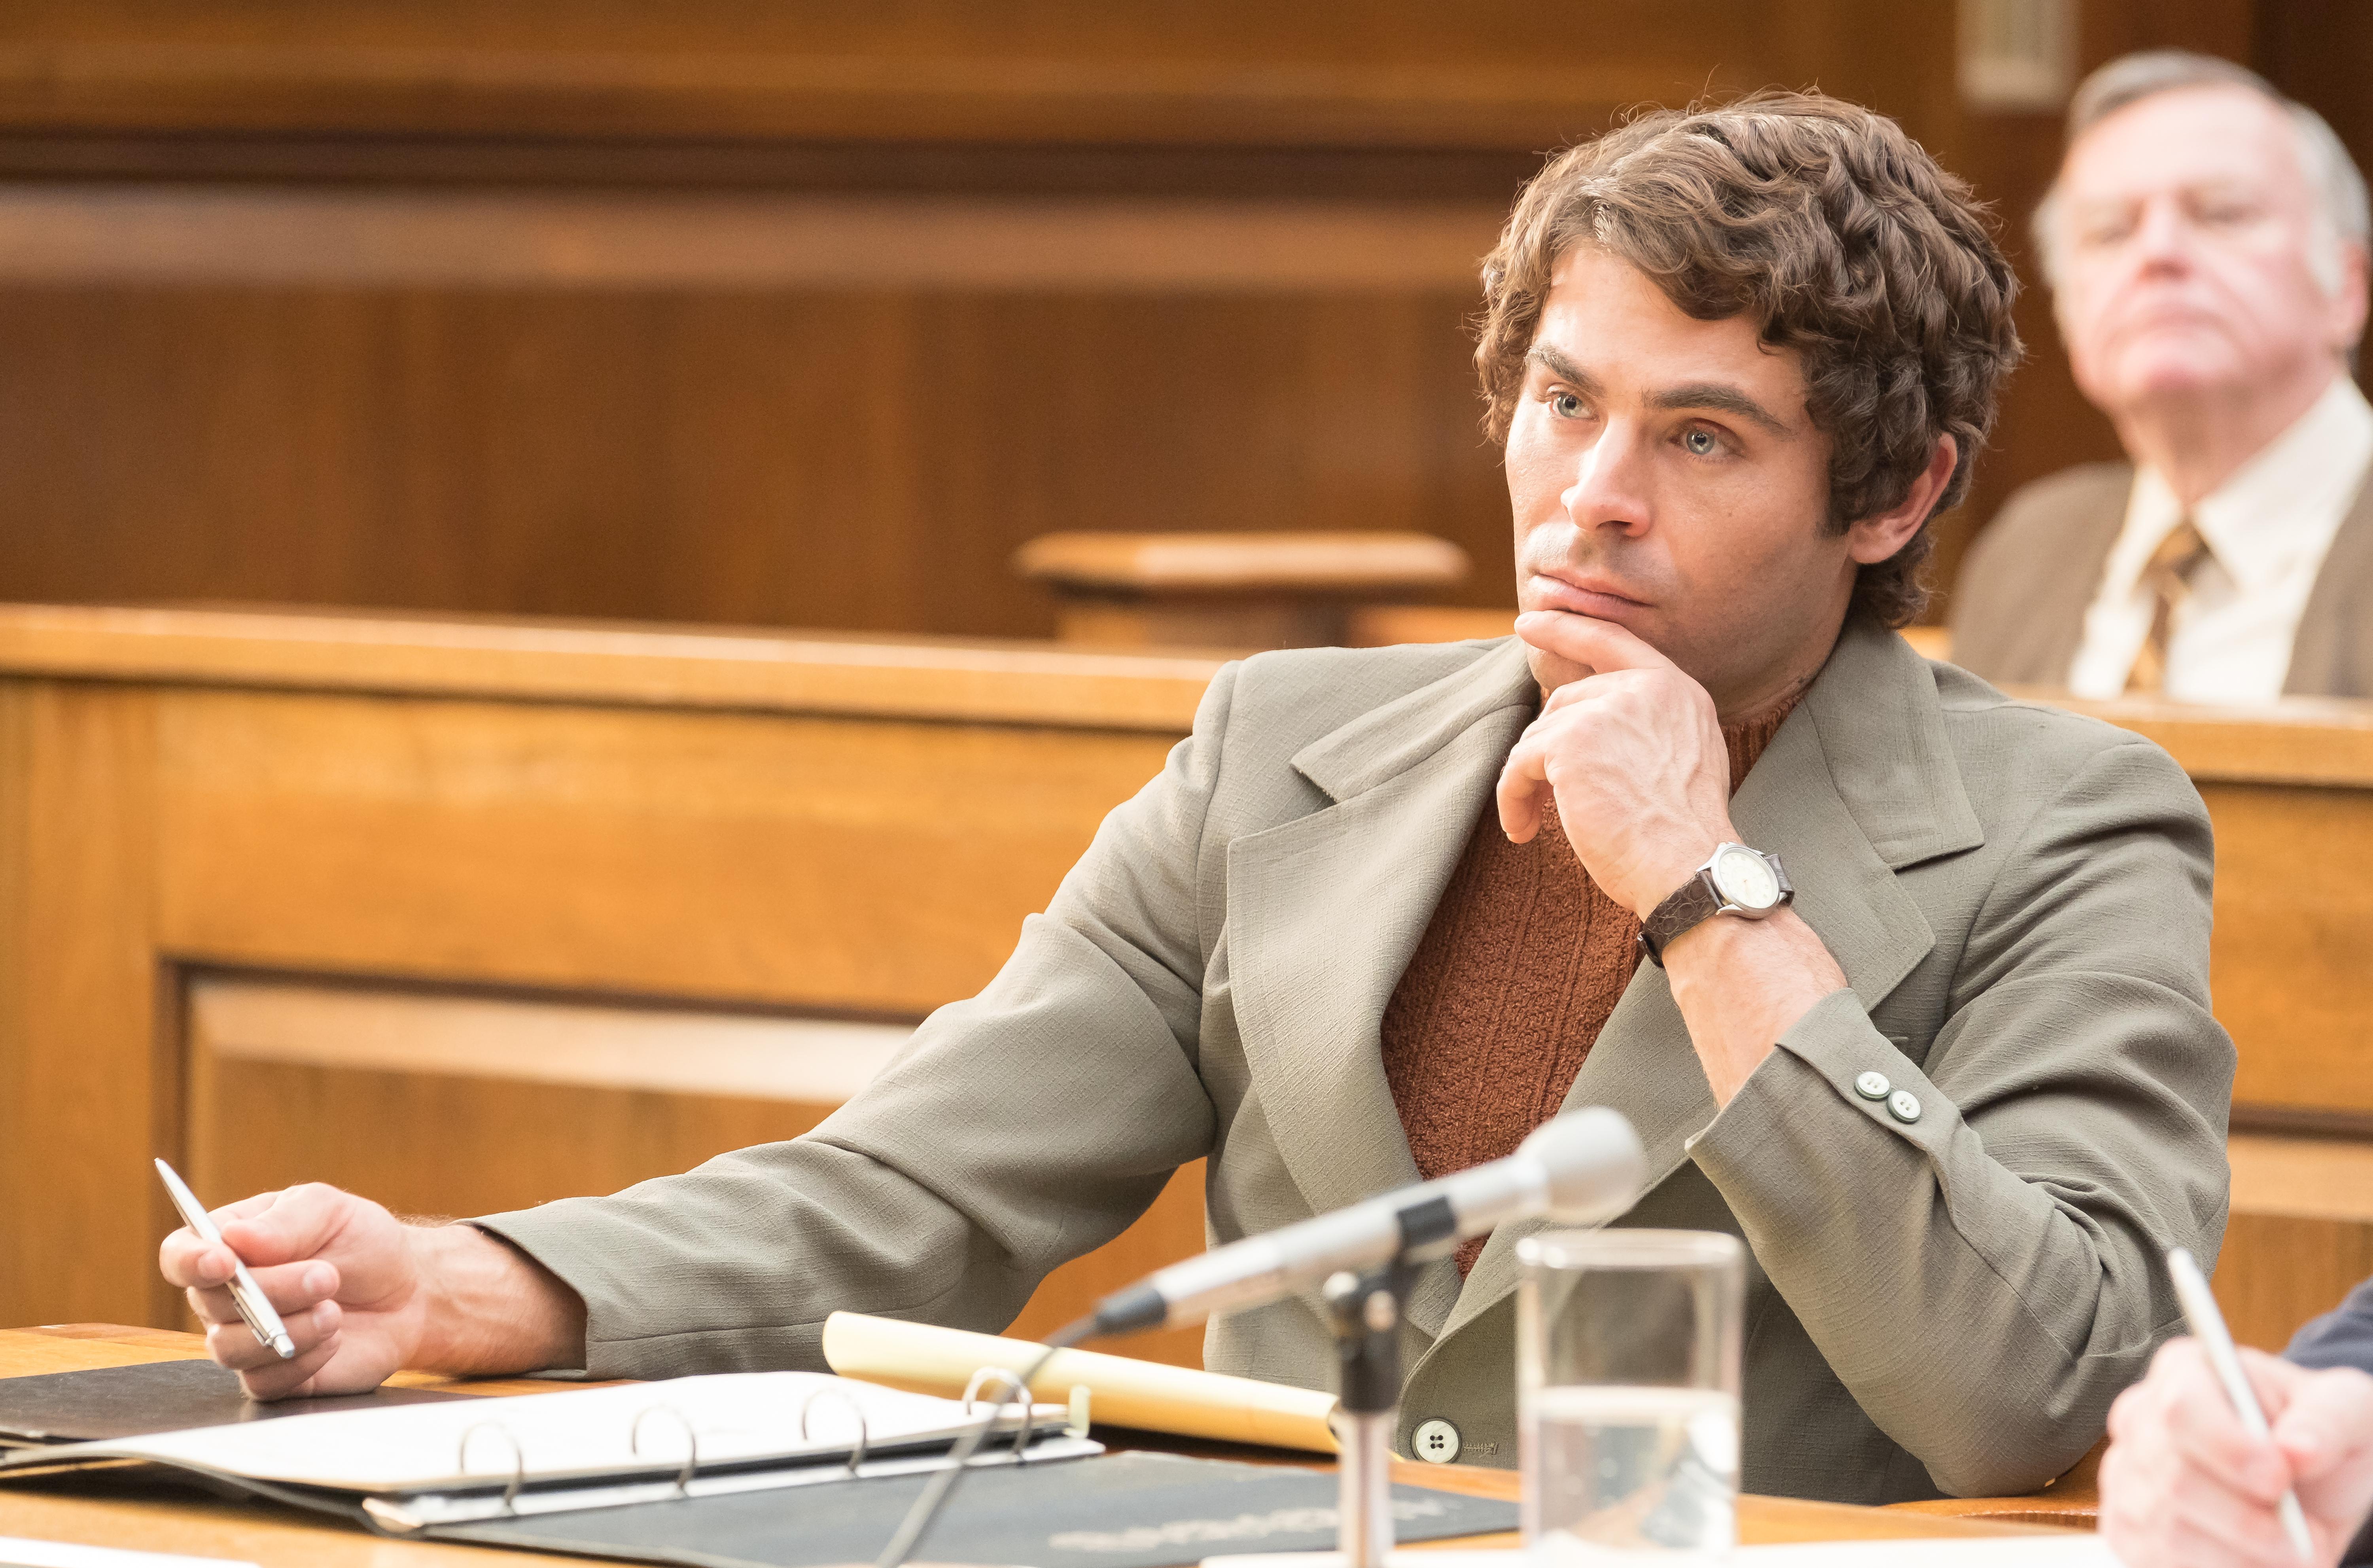 Zac Efron as Ted Bundy in 'Extremely Wicked, Shockingly Evil and Vile'